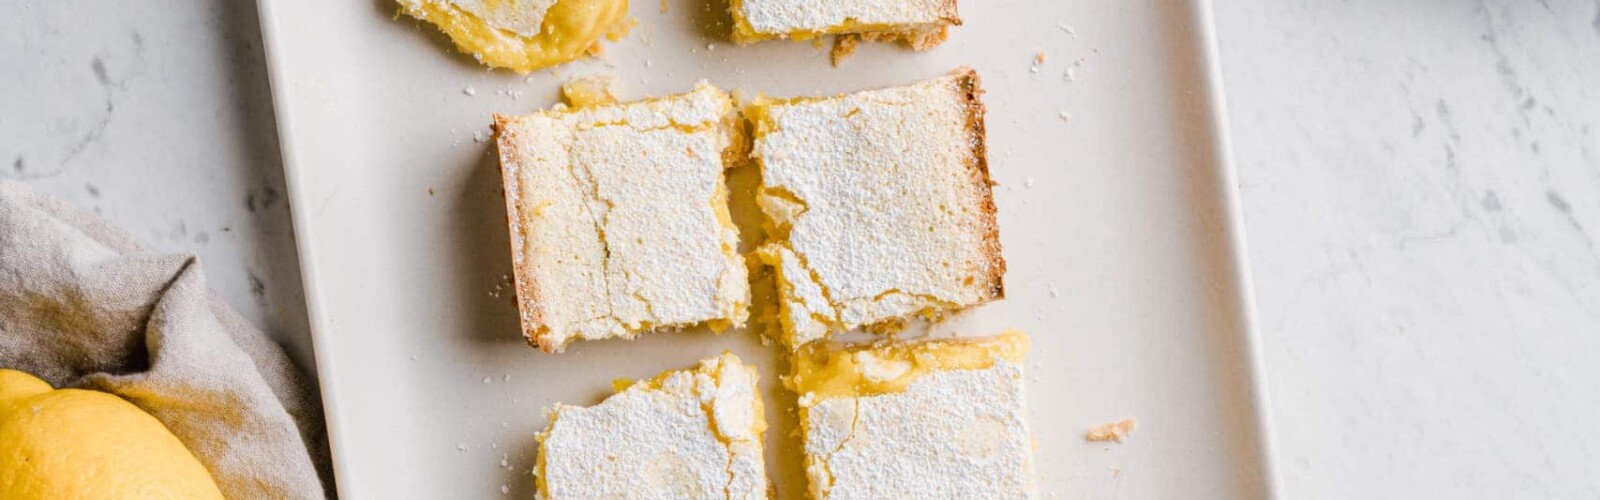 Organic and gluten free lemon bars ready-to-serve and one already nibbled on, placed on a marble counter top